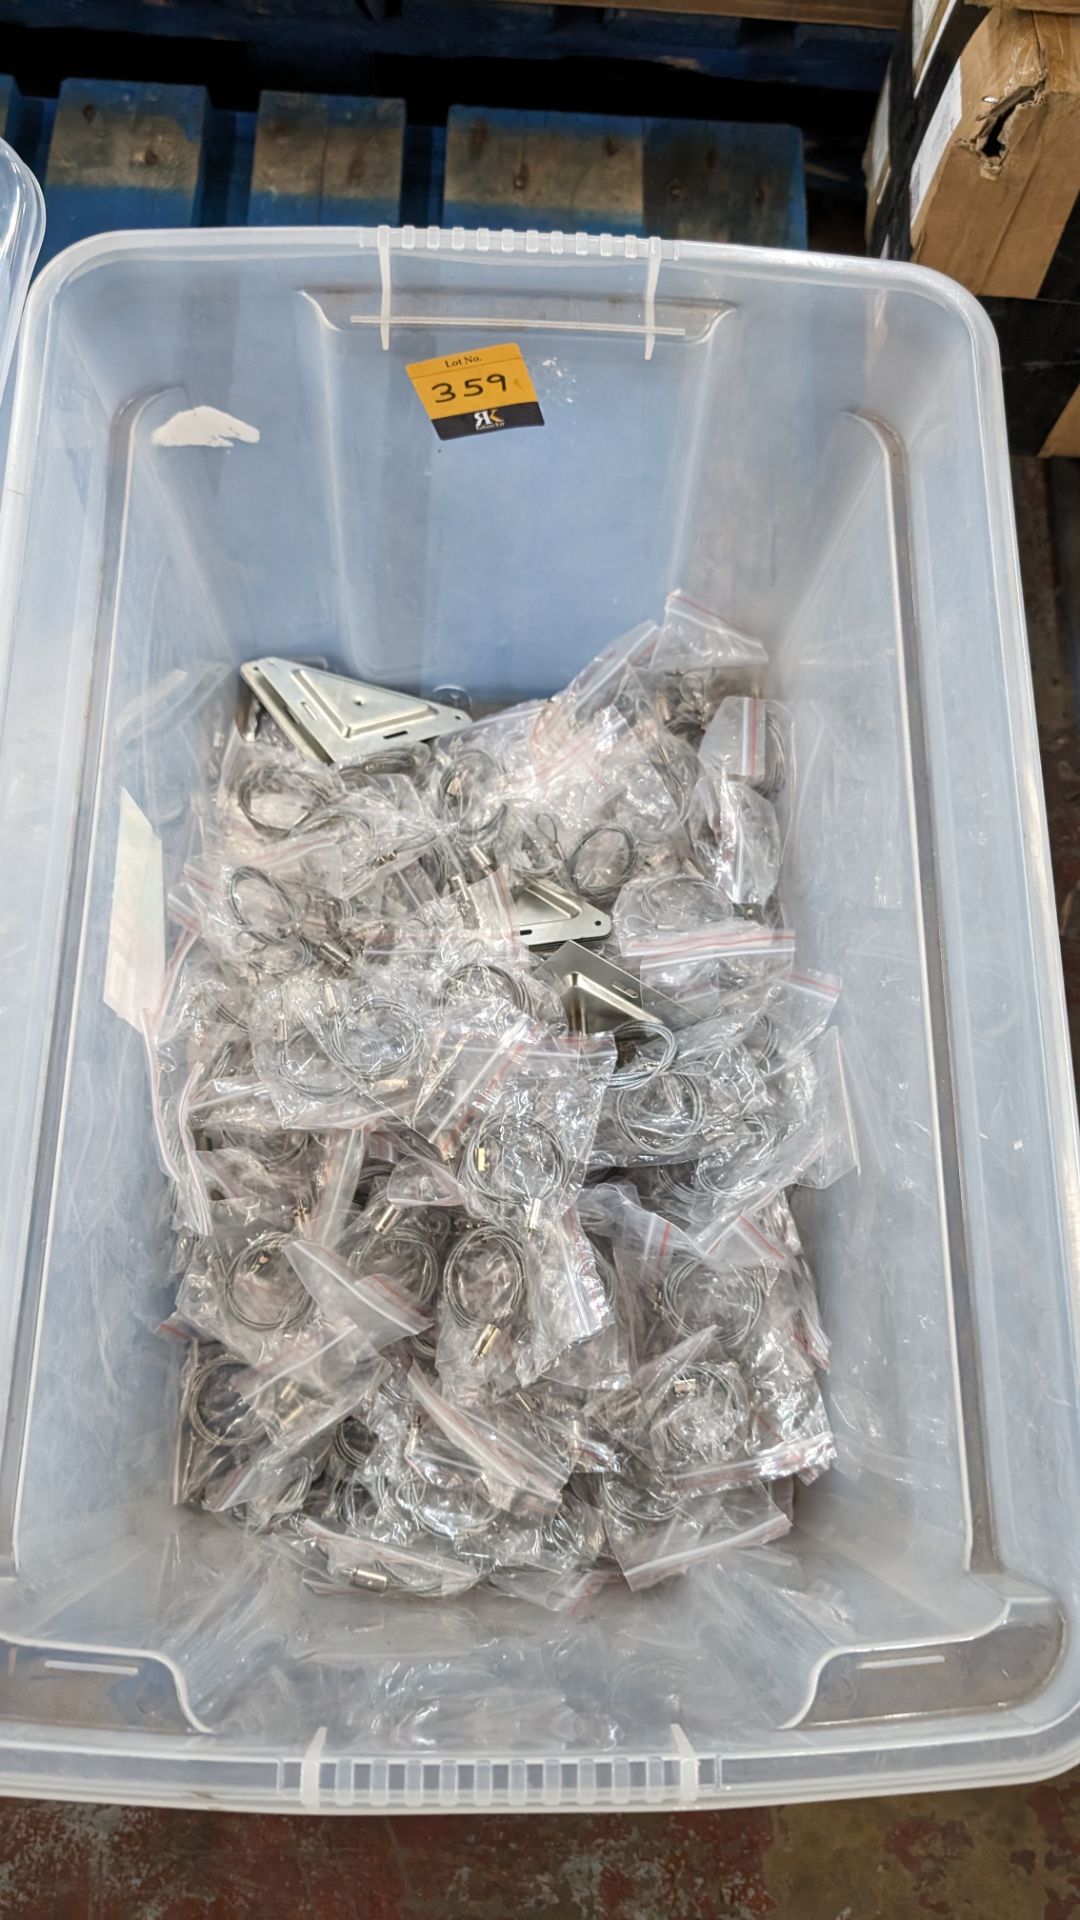 The contents of a crate of wire cable and fixing plates. For use with A1 and A2 panels